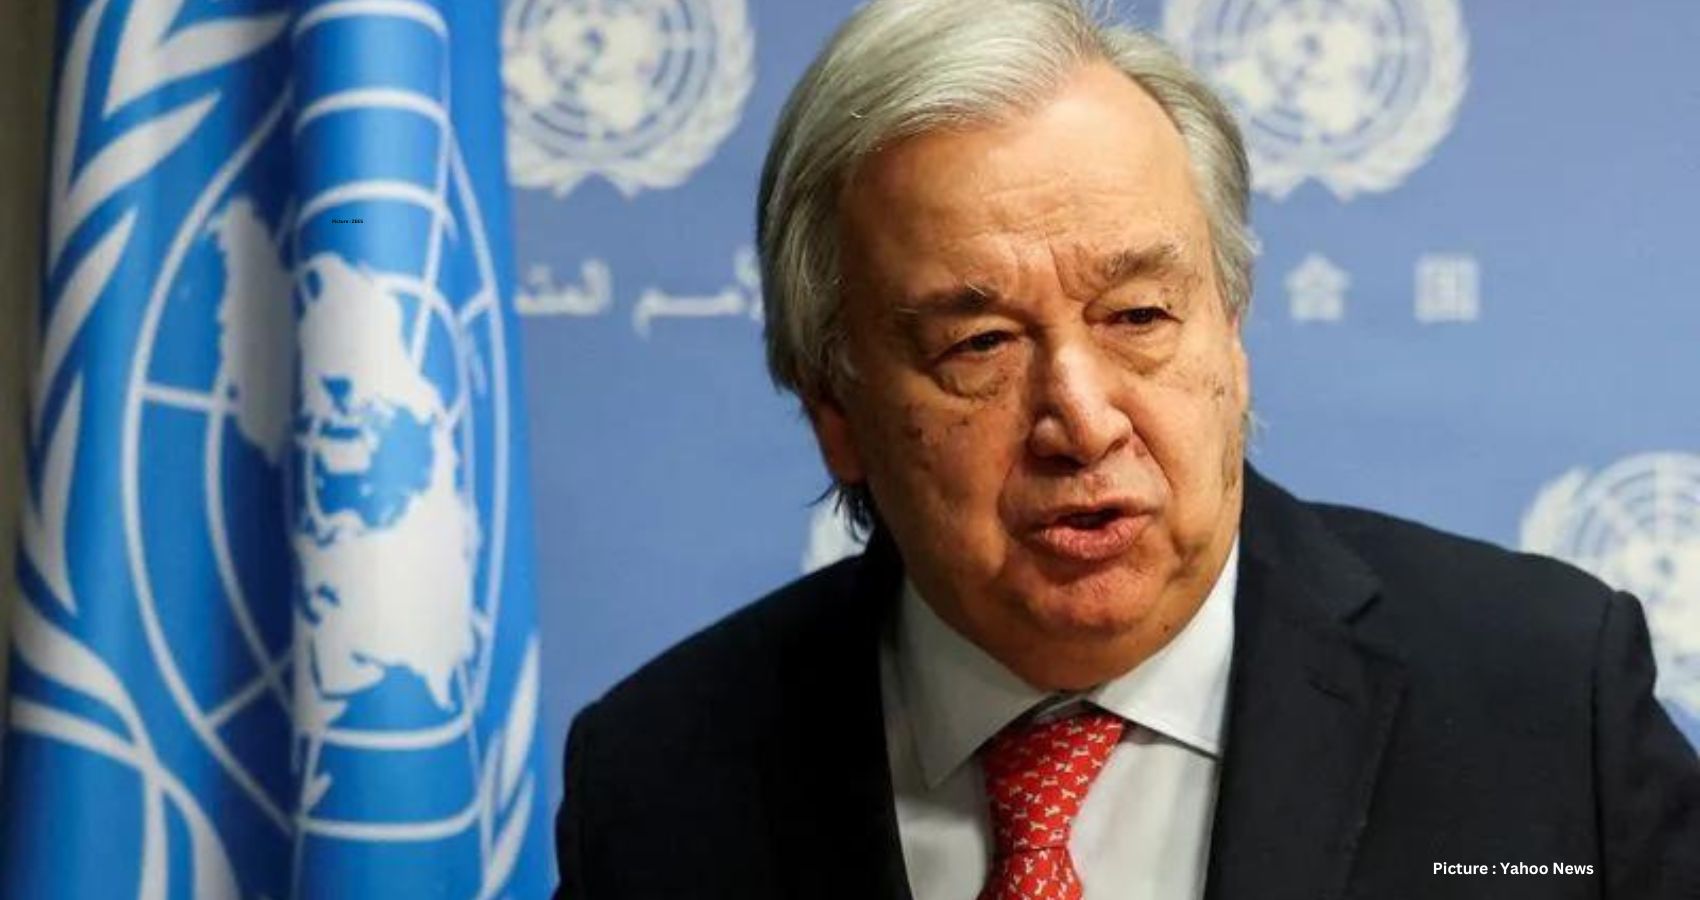 Featured & Cover FILE PHOTO United Nations Secretary General Antonio Guterres speaks at the United Nations Headquarters in New York